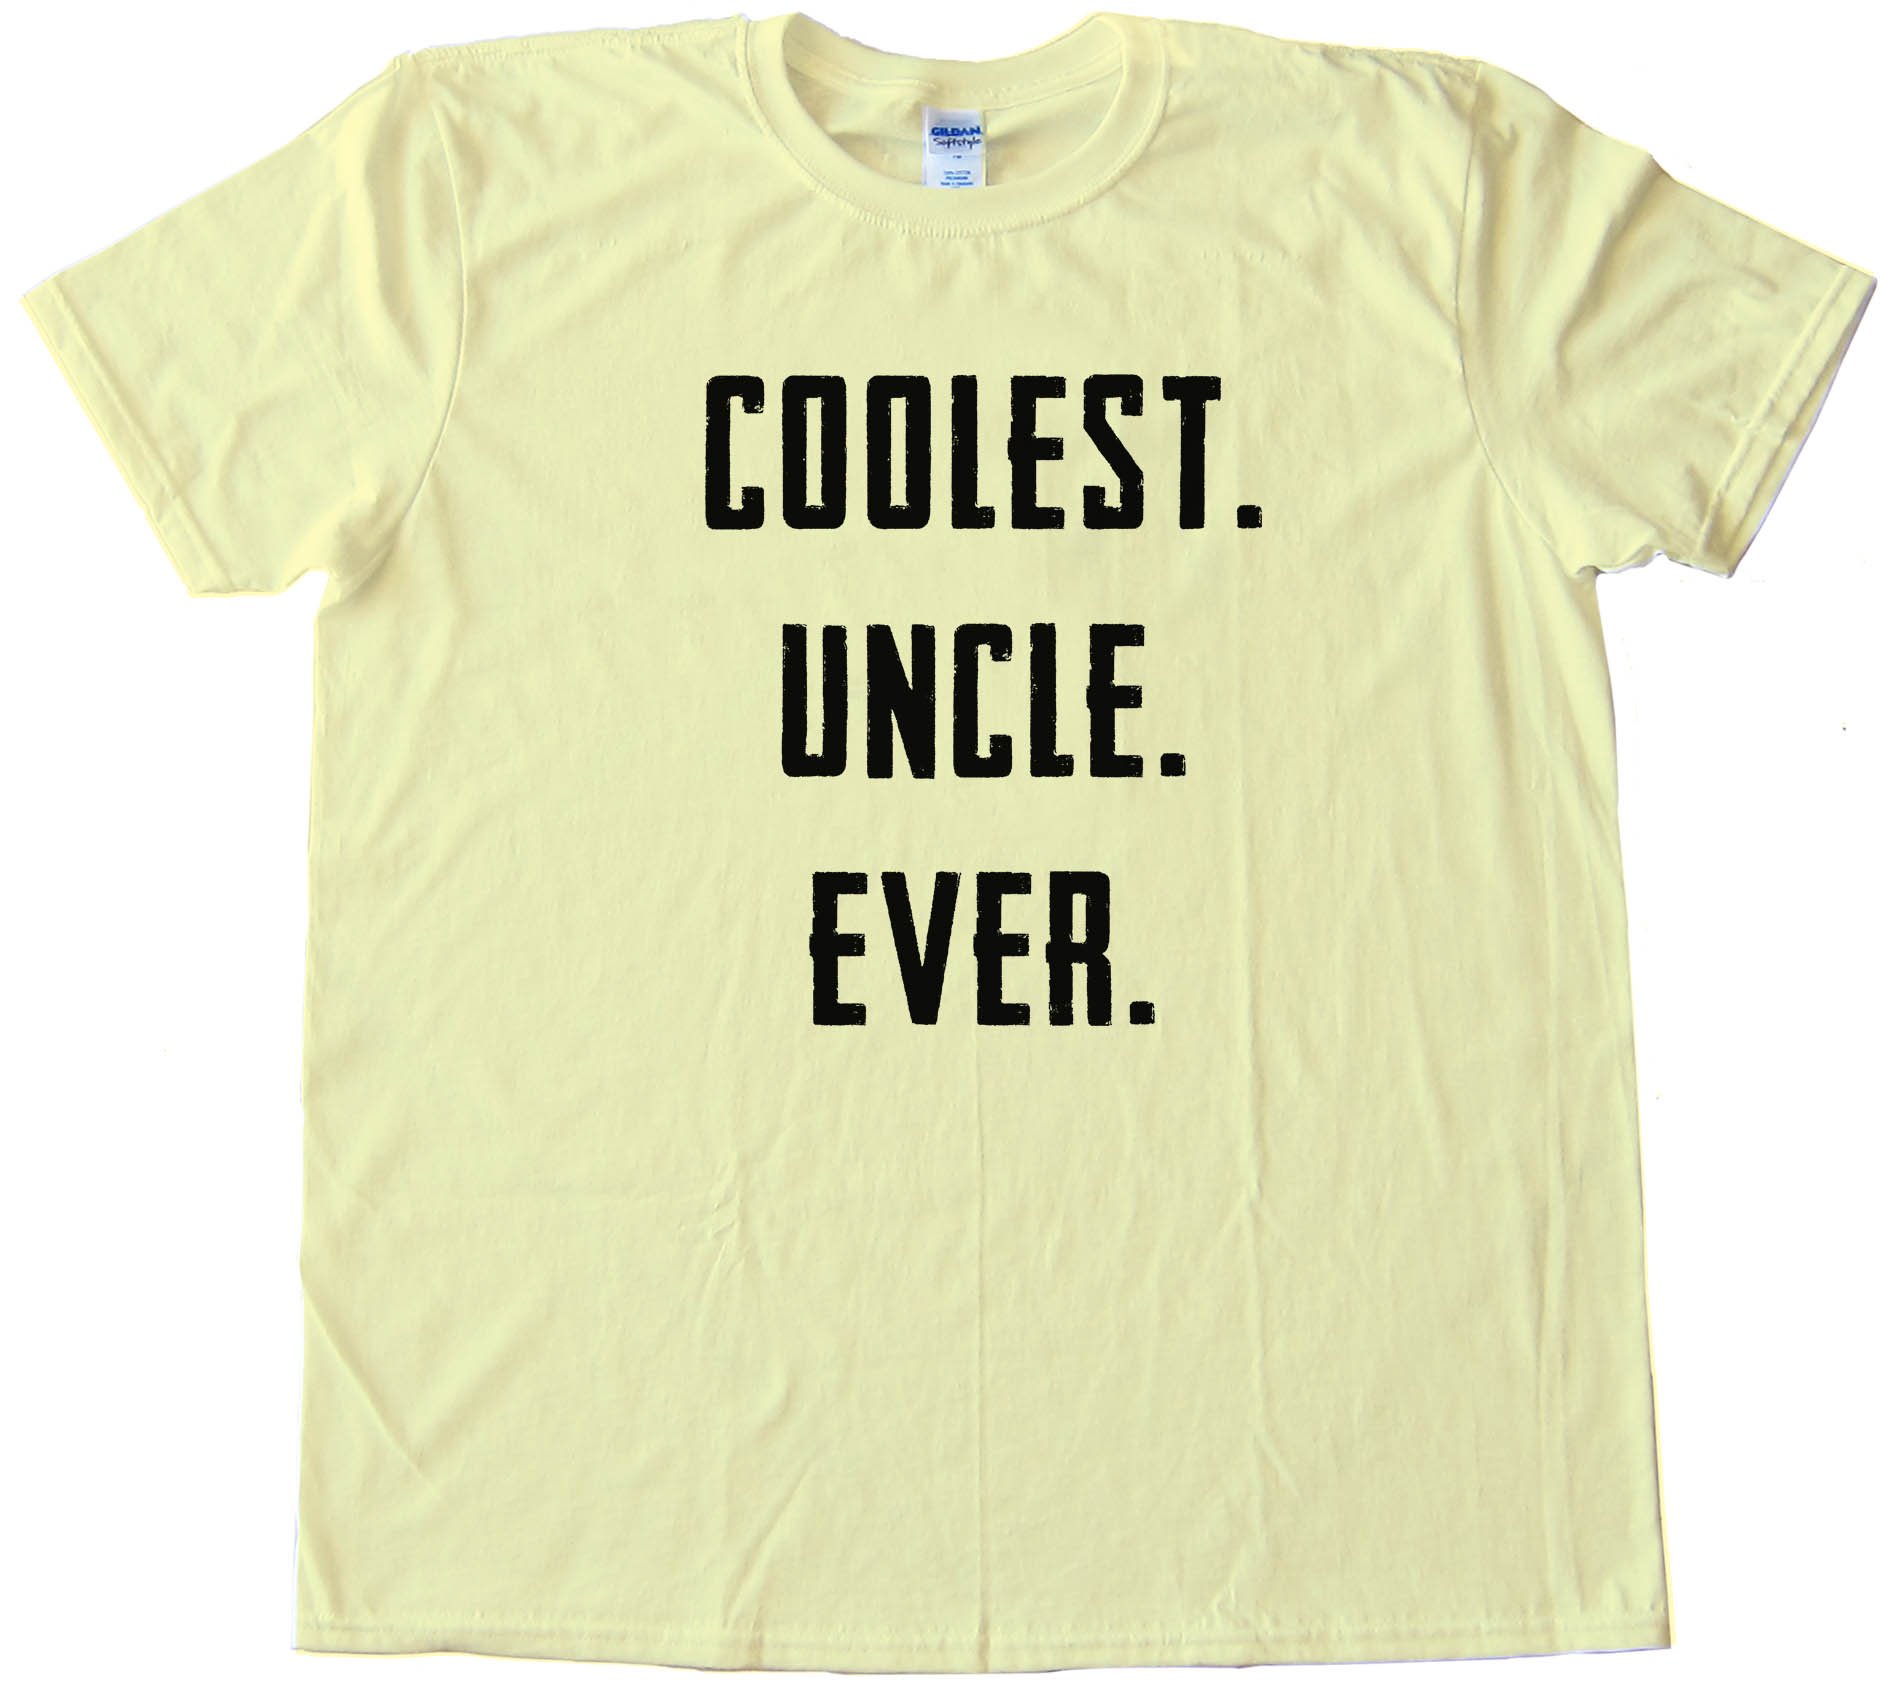 Coolest. Uncle. Ever. - Tee Shirt